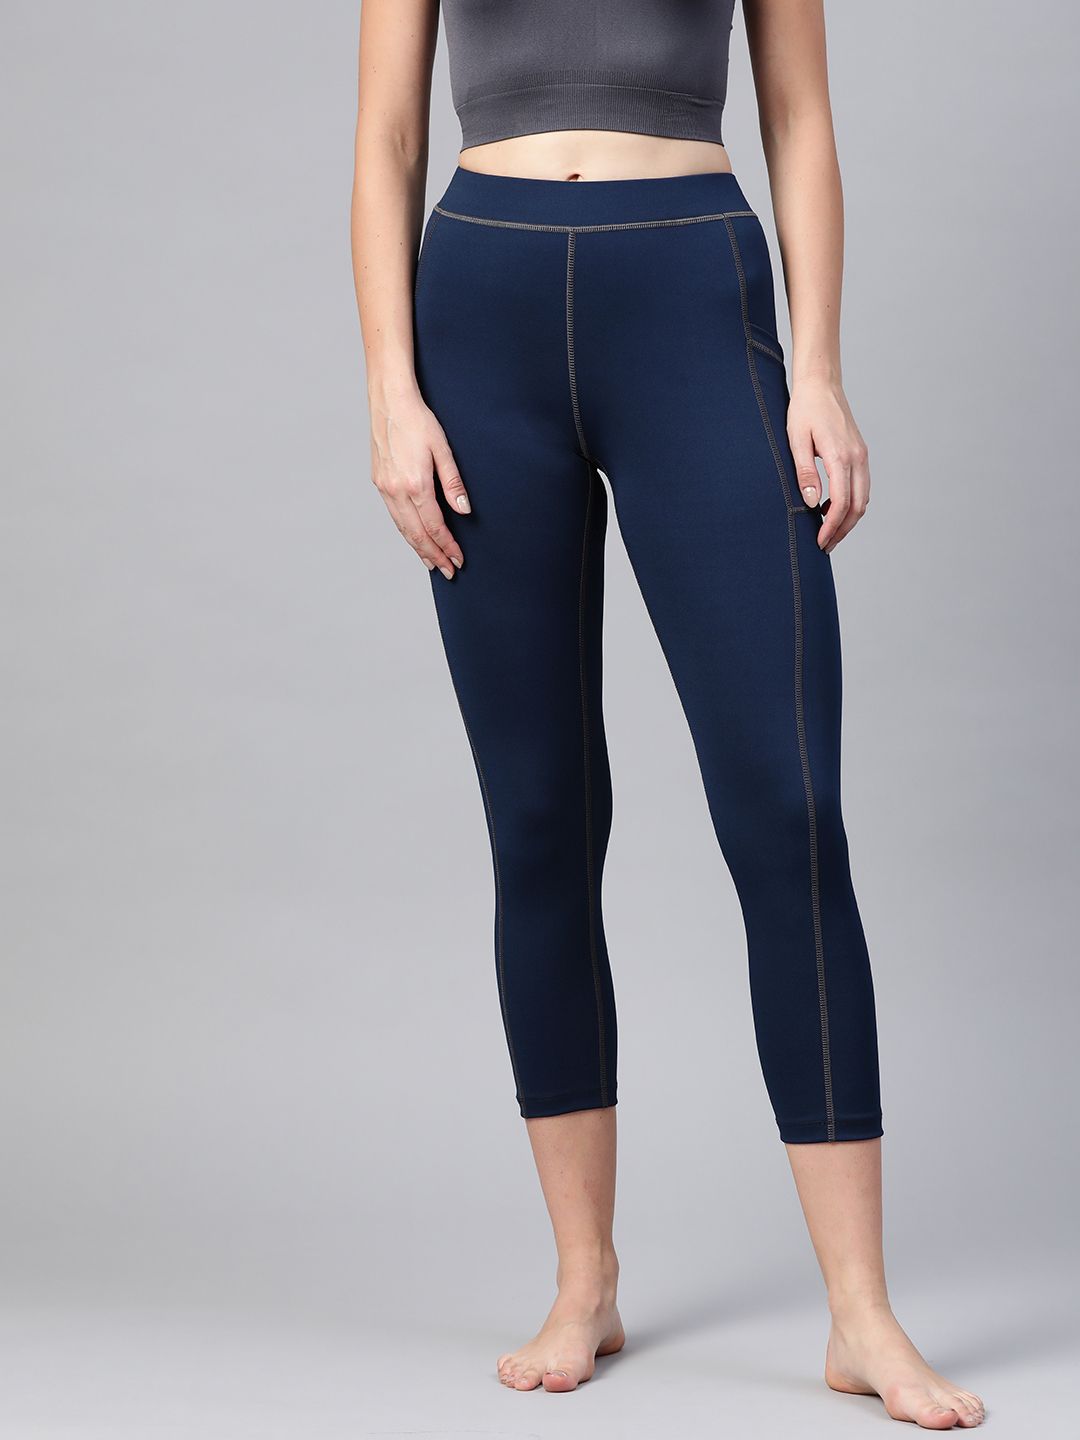 Chkokko Women Navy Blue Solid Cropped Yoga Tights Price in India